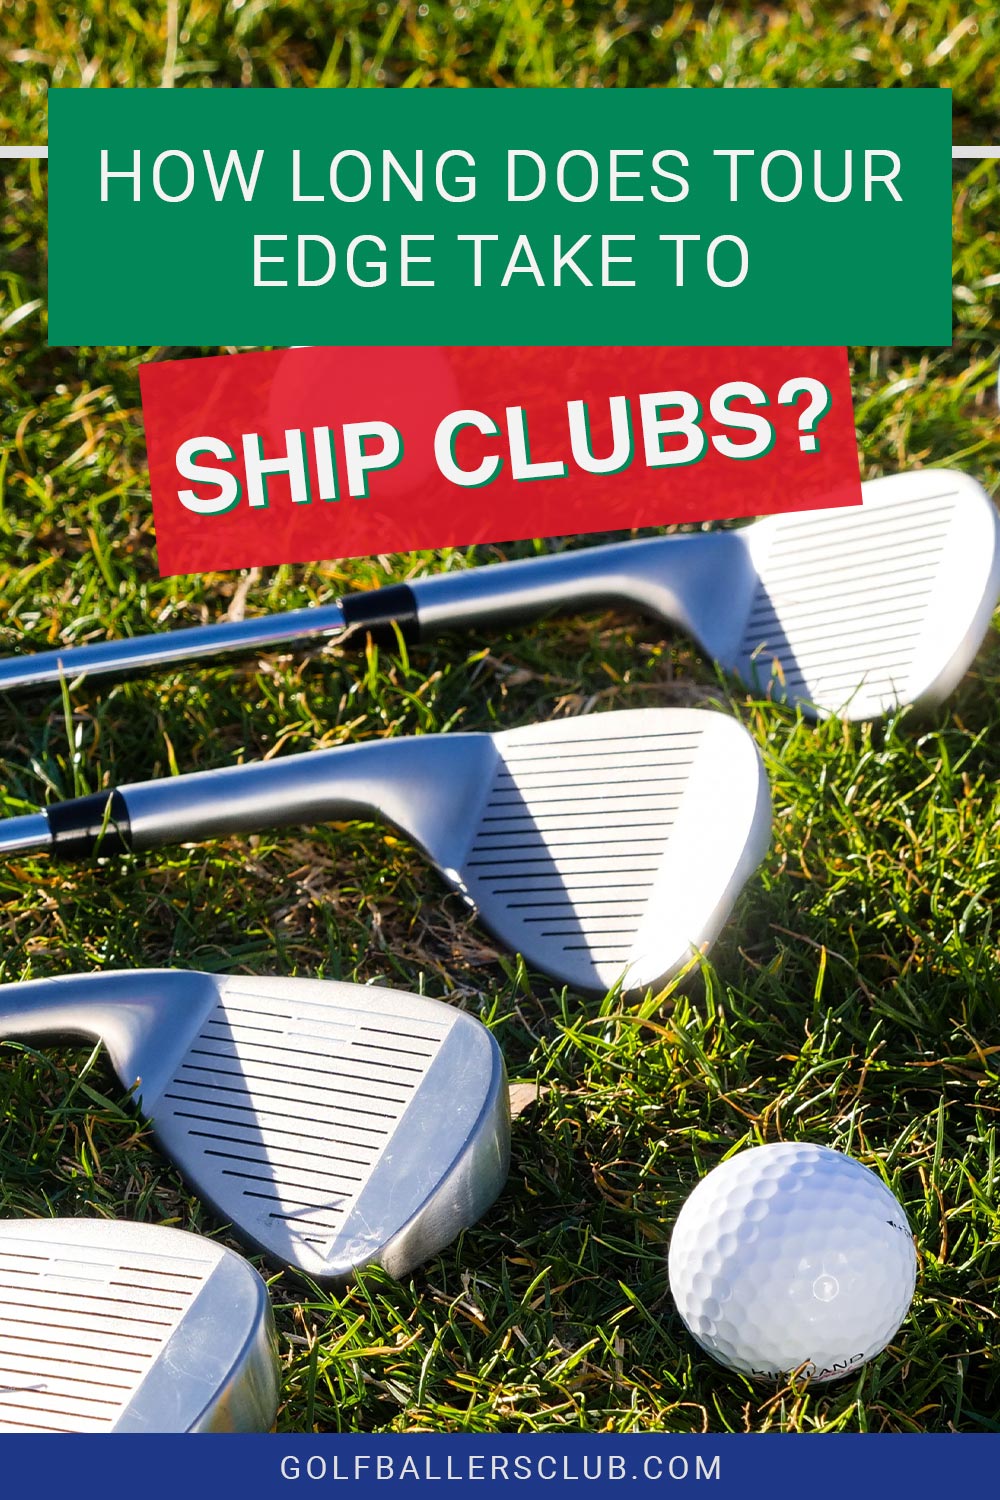 A few golf irons and a golf ball on grass - How Long Does Tour Edge Take To Ship Clubs?